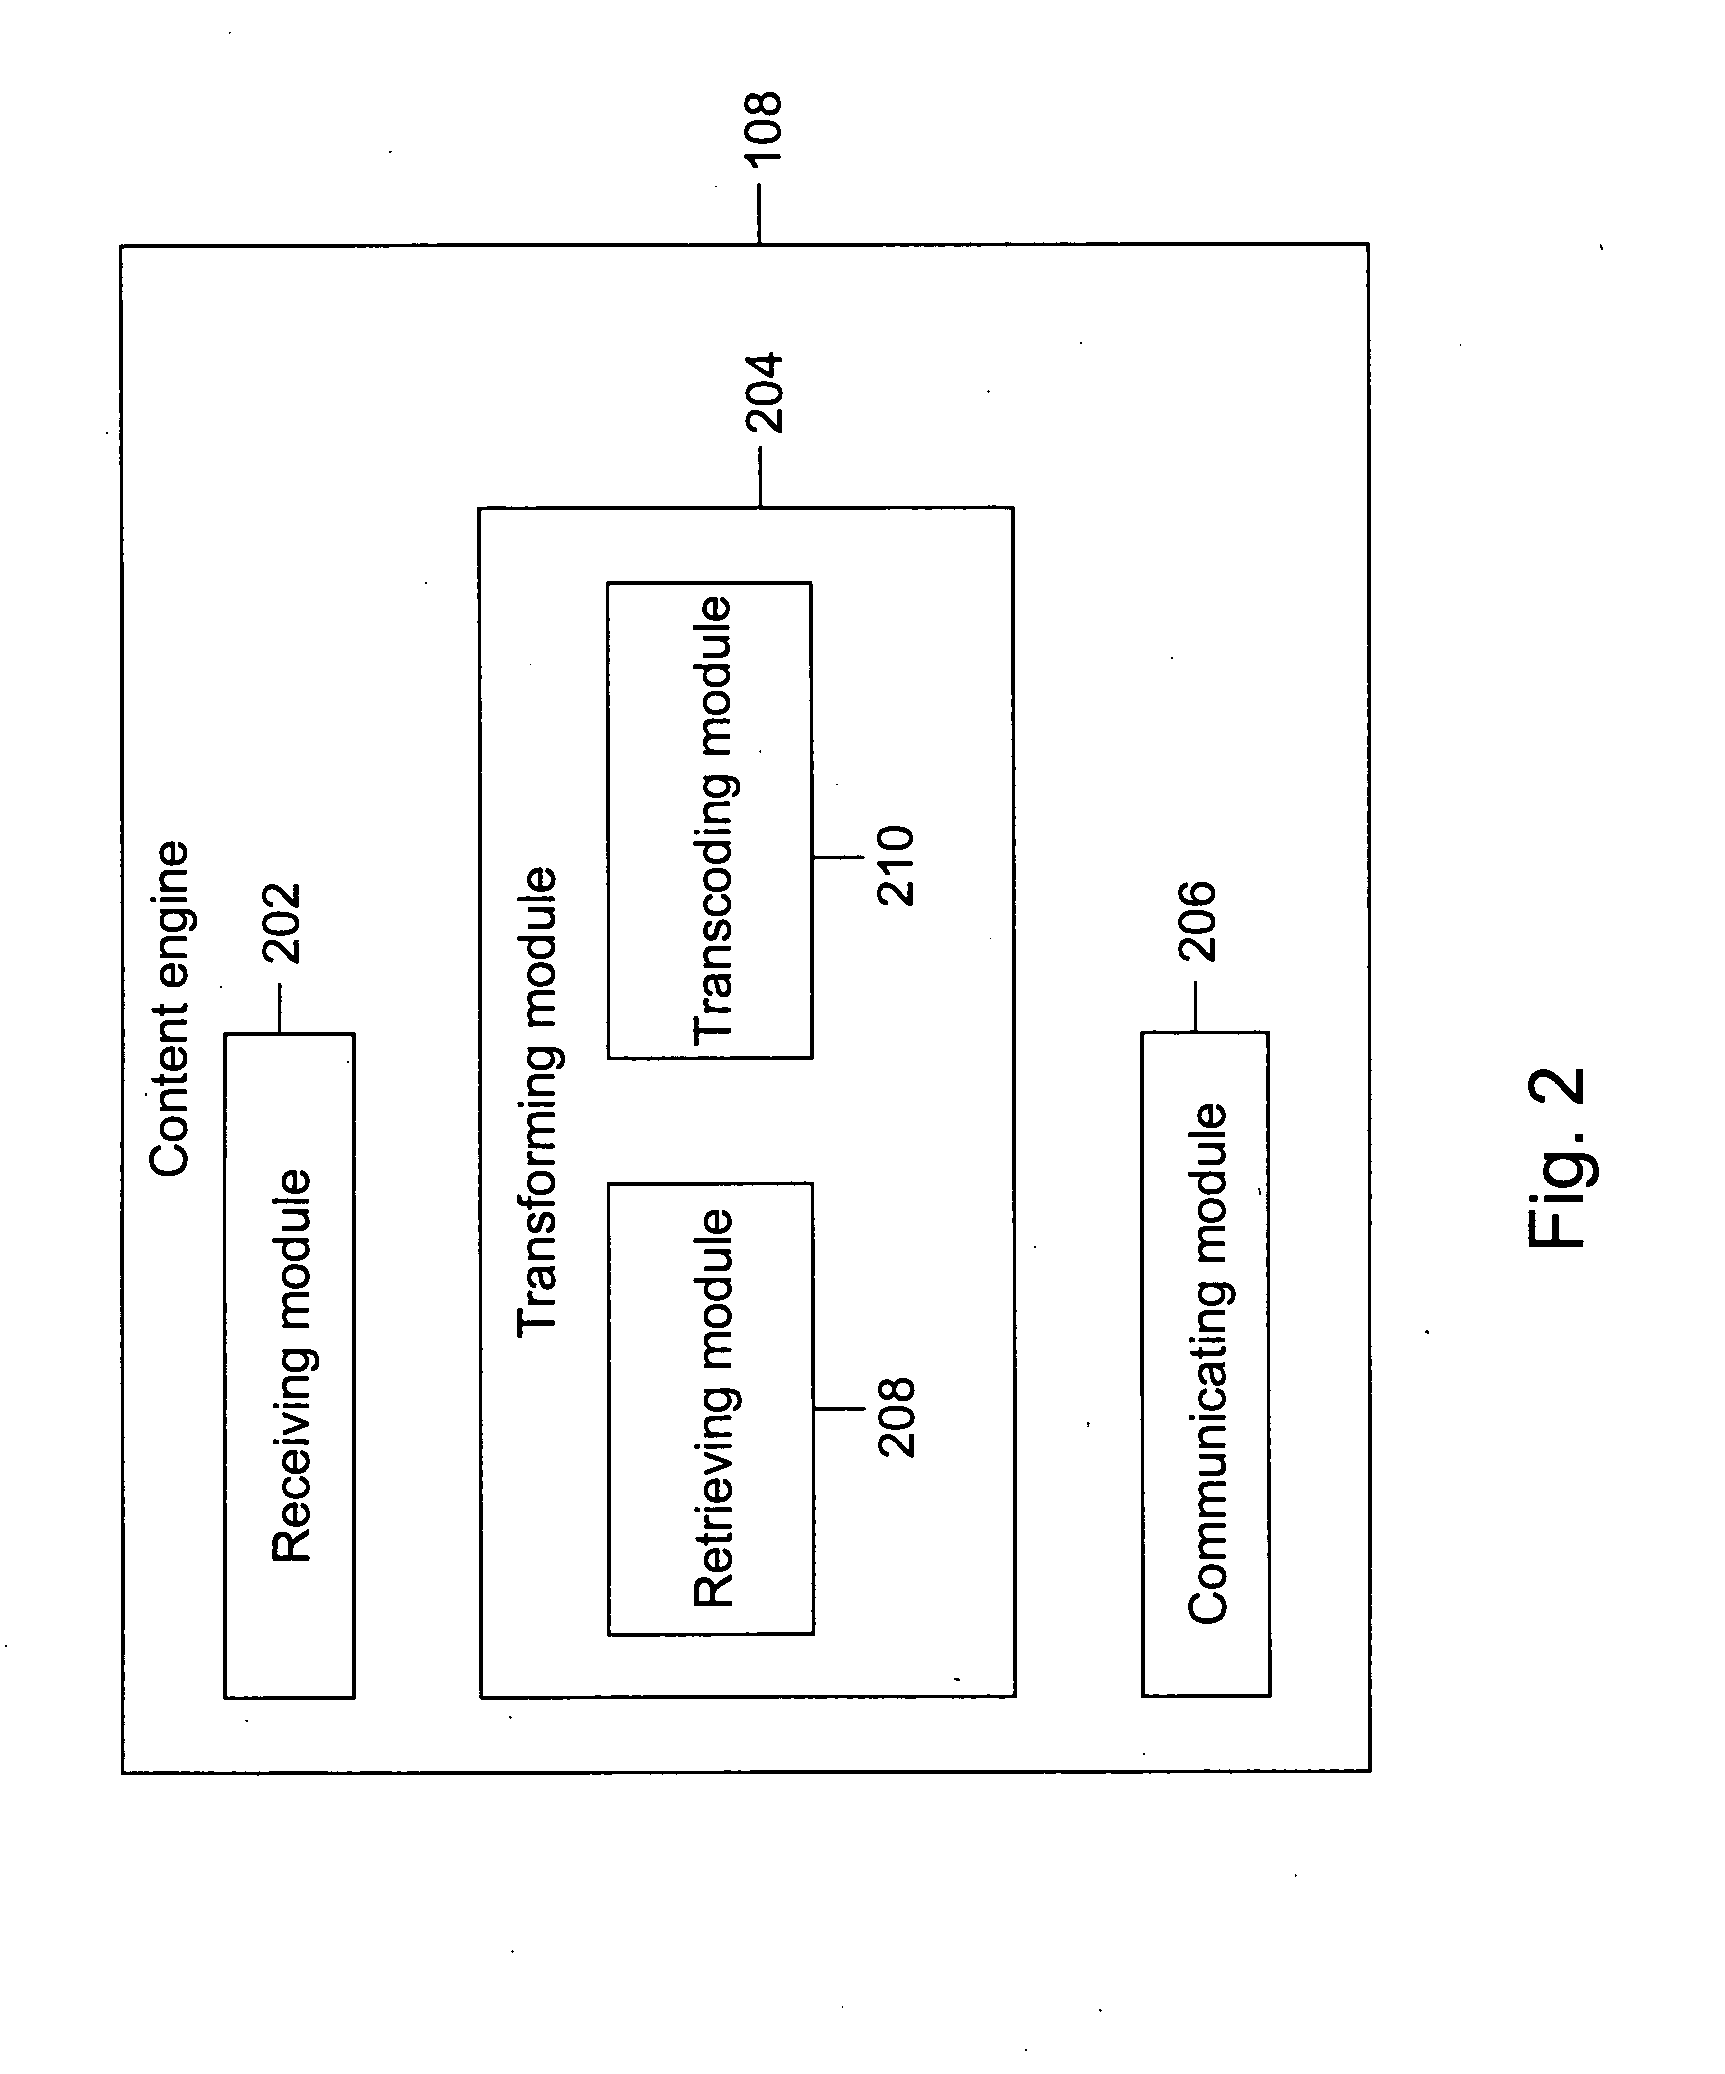 Method and system for transparently transcoding a multicast stream